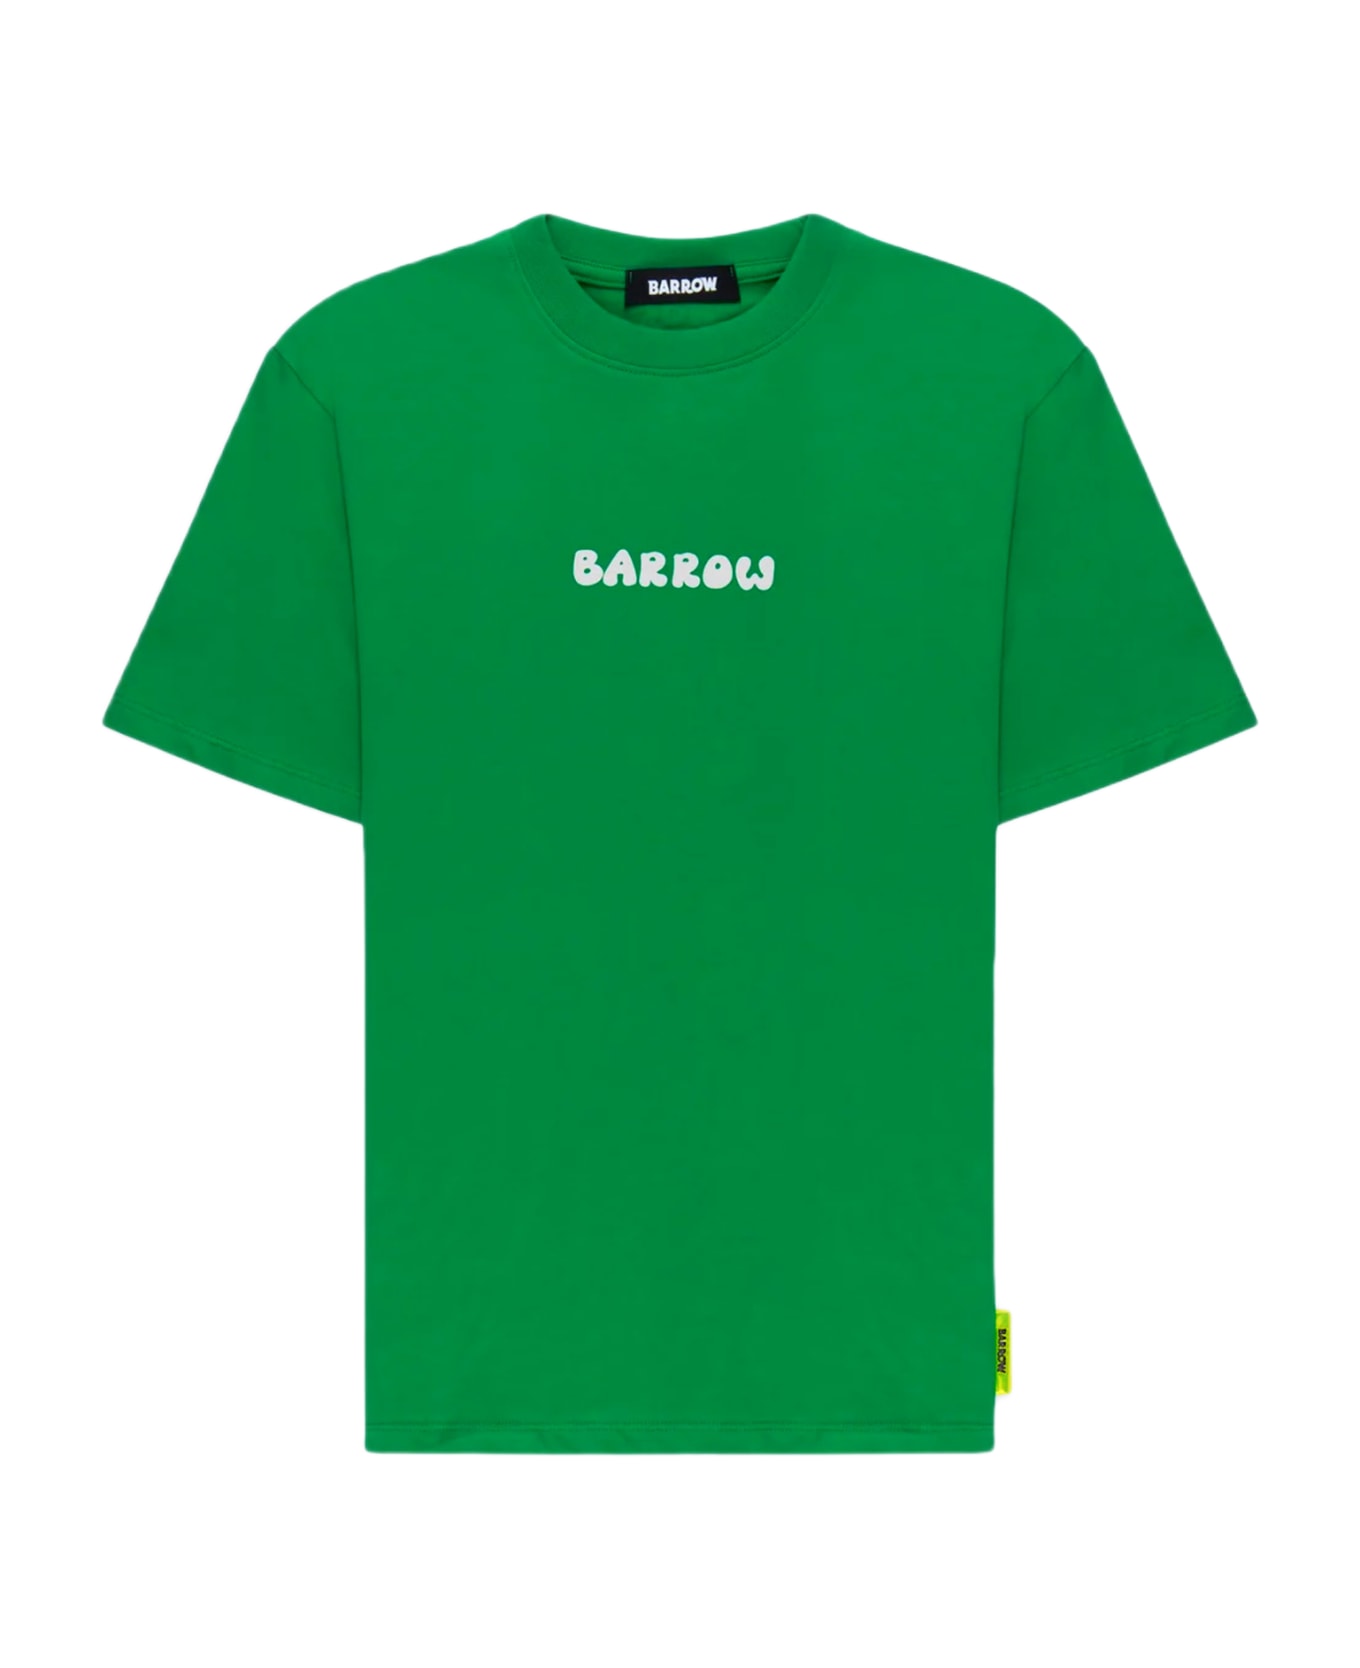 Barrow Jersey T-shirt Unisex Emerald green t-shirt with front logo and back graphic print - Verde